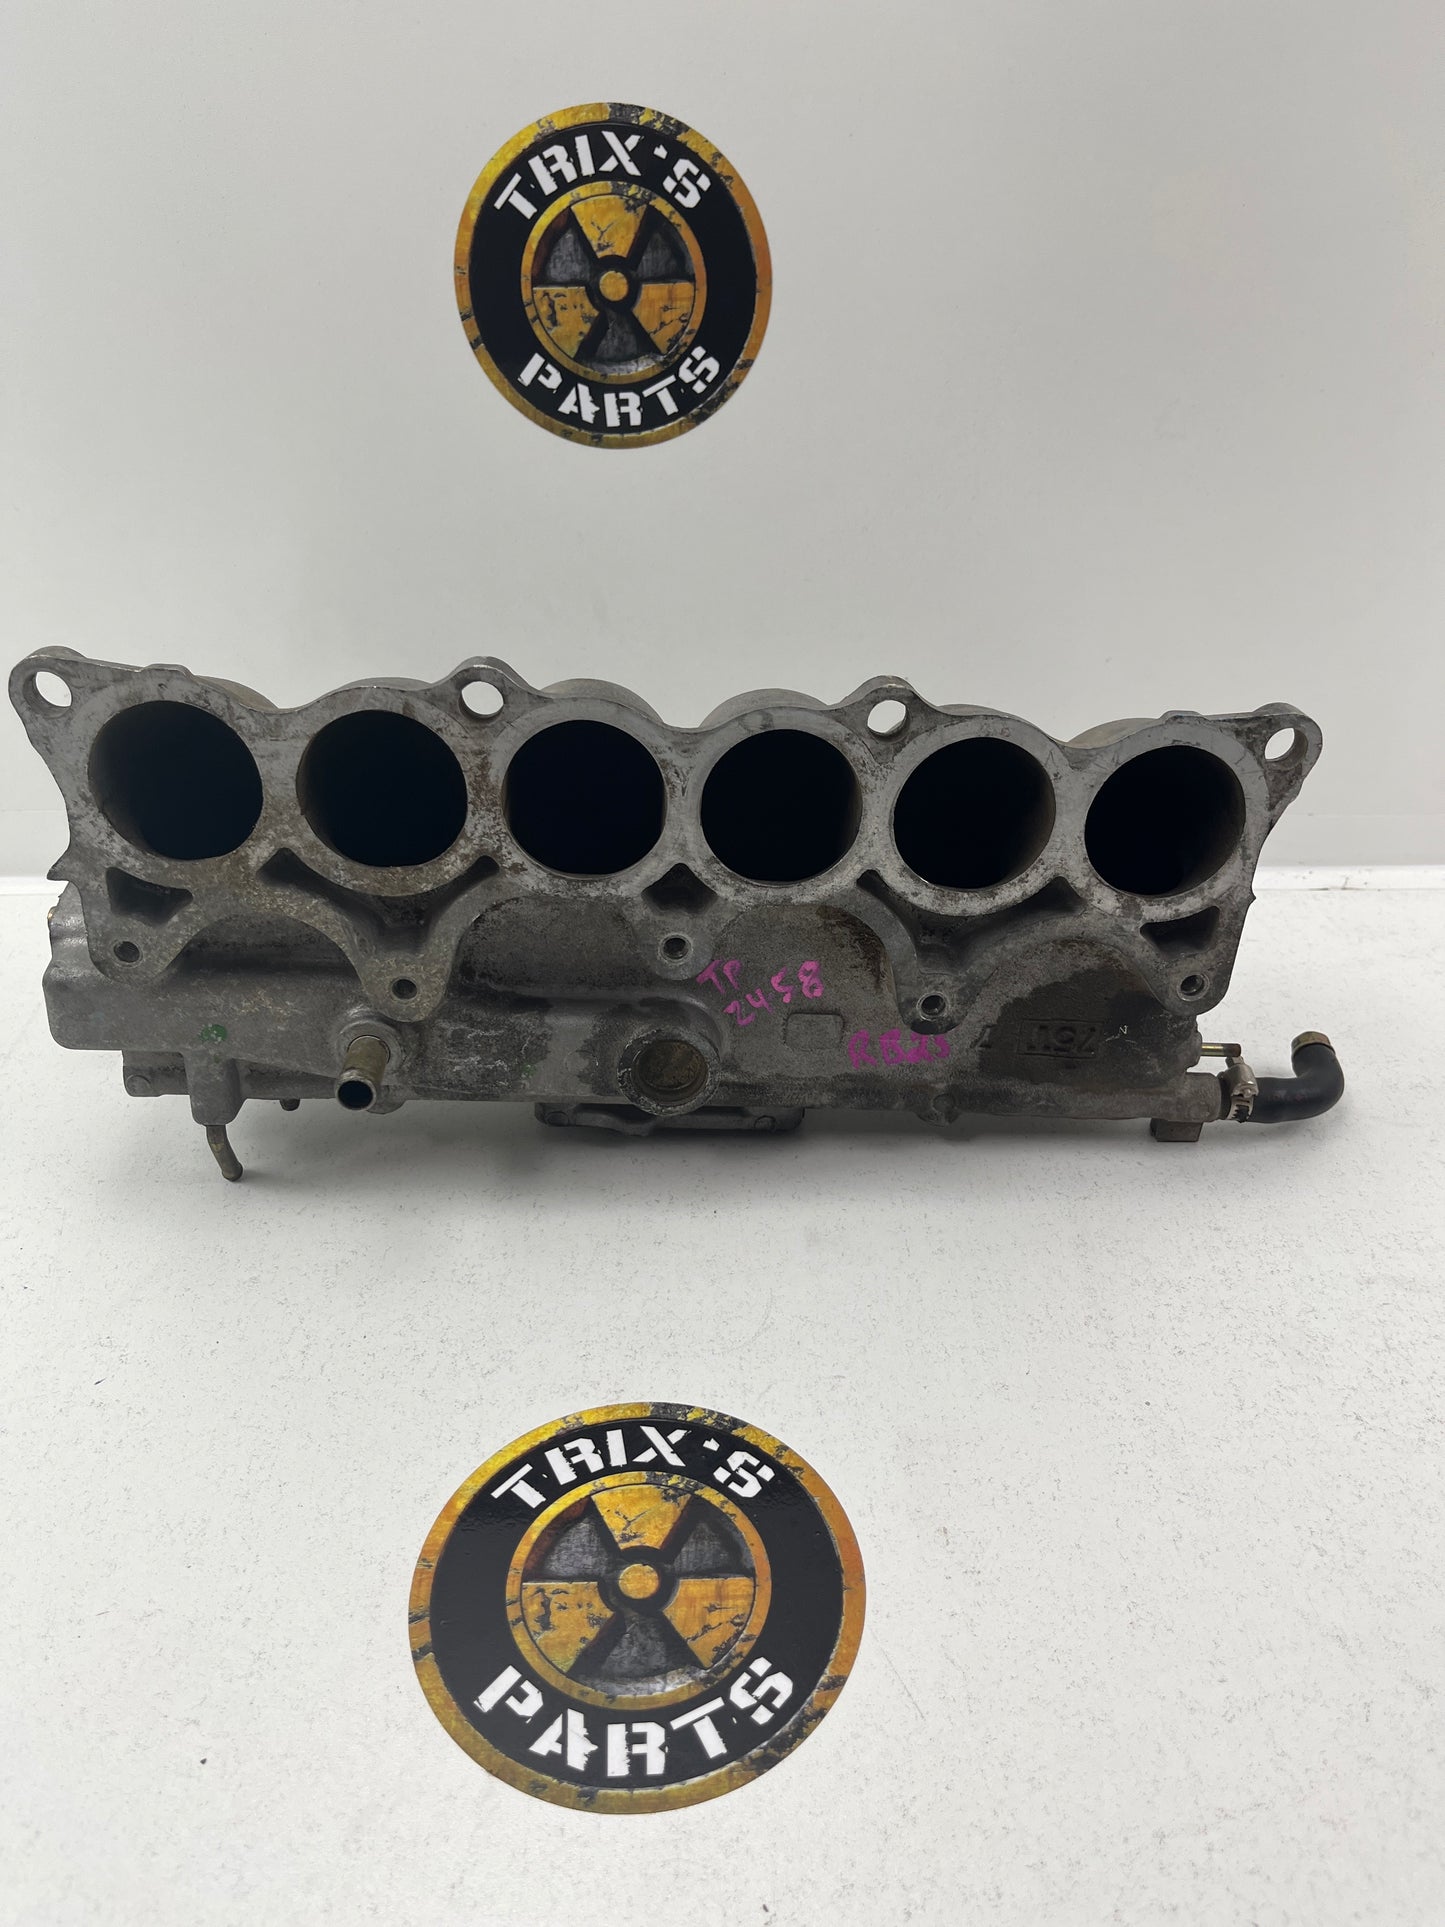 Used Top Bare Intake Manifold to Suit RB25DET and RB25DE Engines